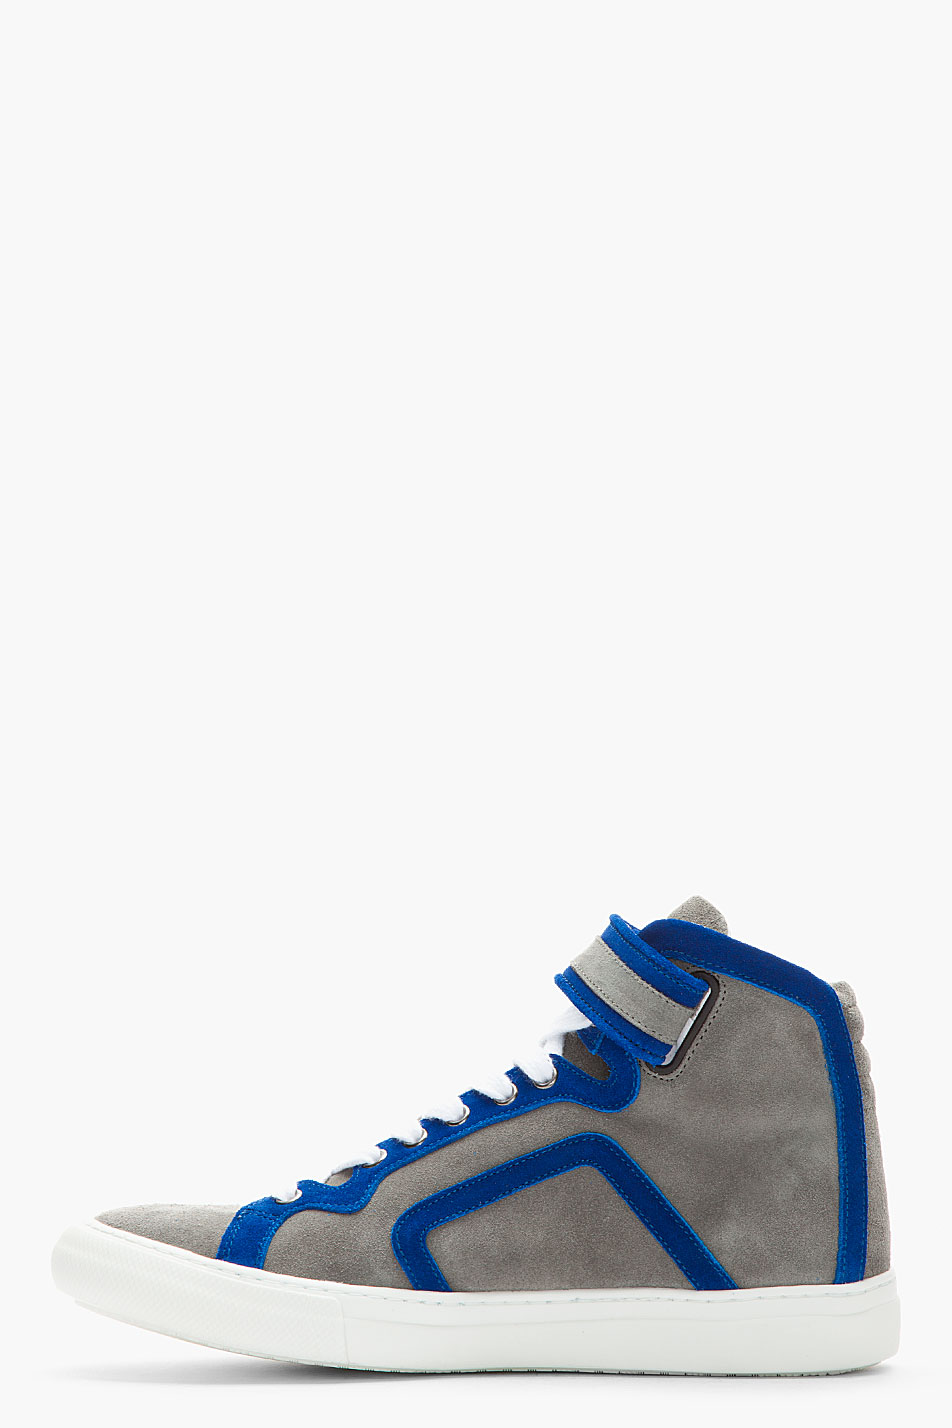 Pierre Hardy Royal Blue and Grey Suede Hightop Sneakers in Gray for Men ...